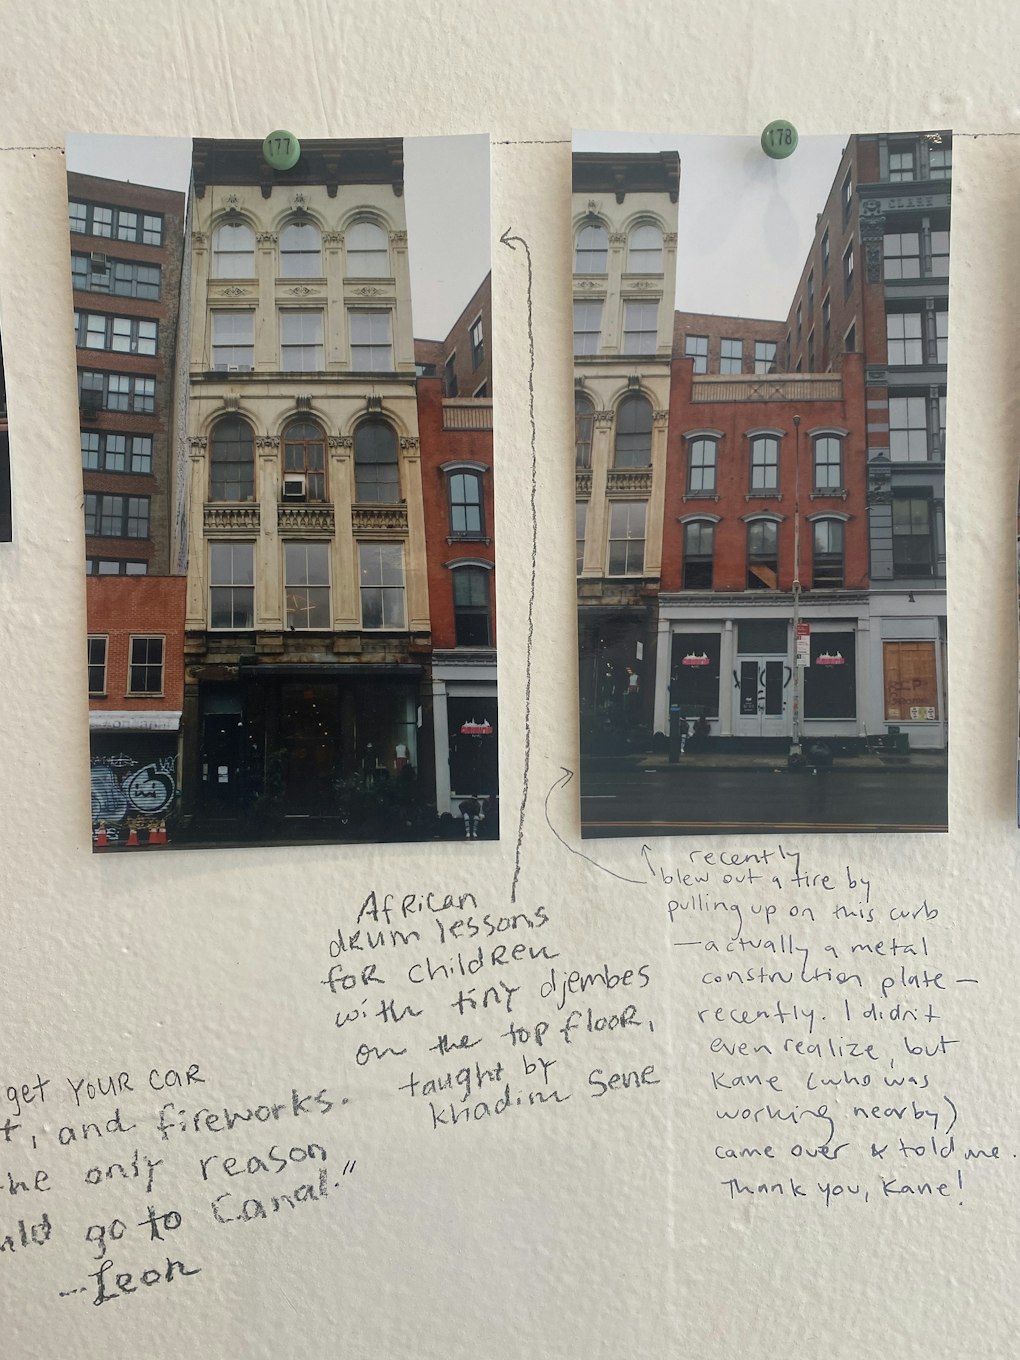 Bags, Bootlegs and Art: A Quirky Communion on Canal Street - The